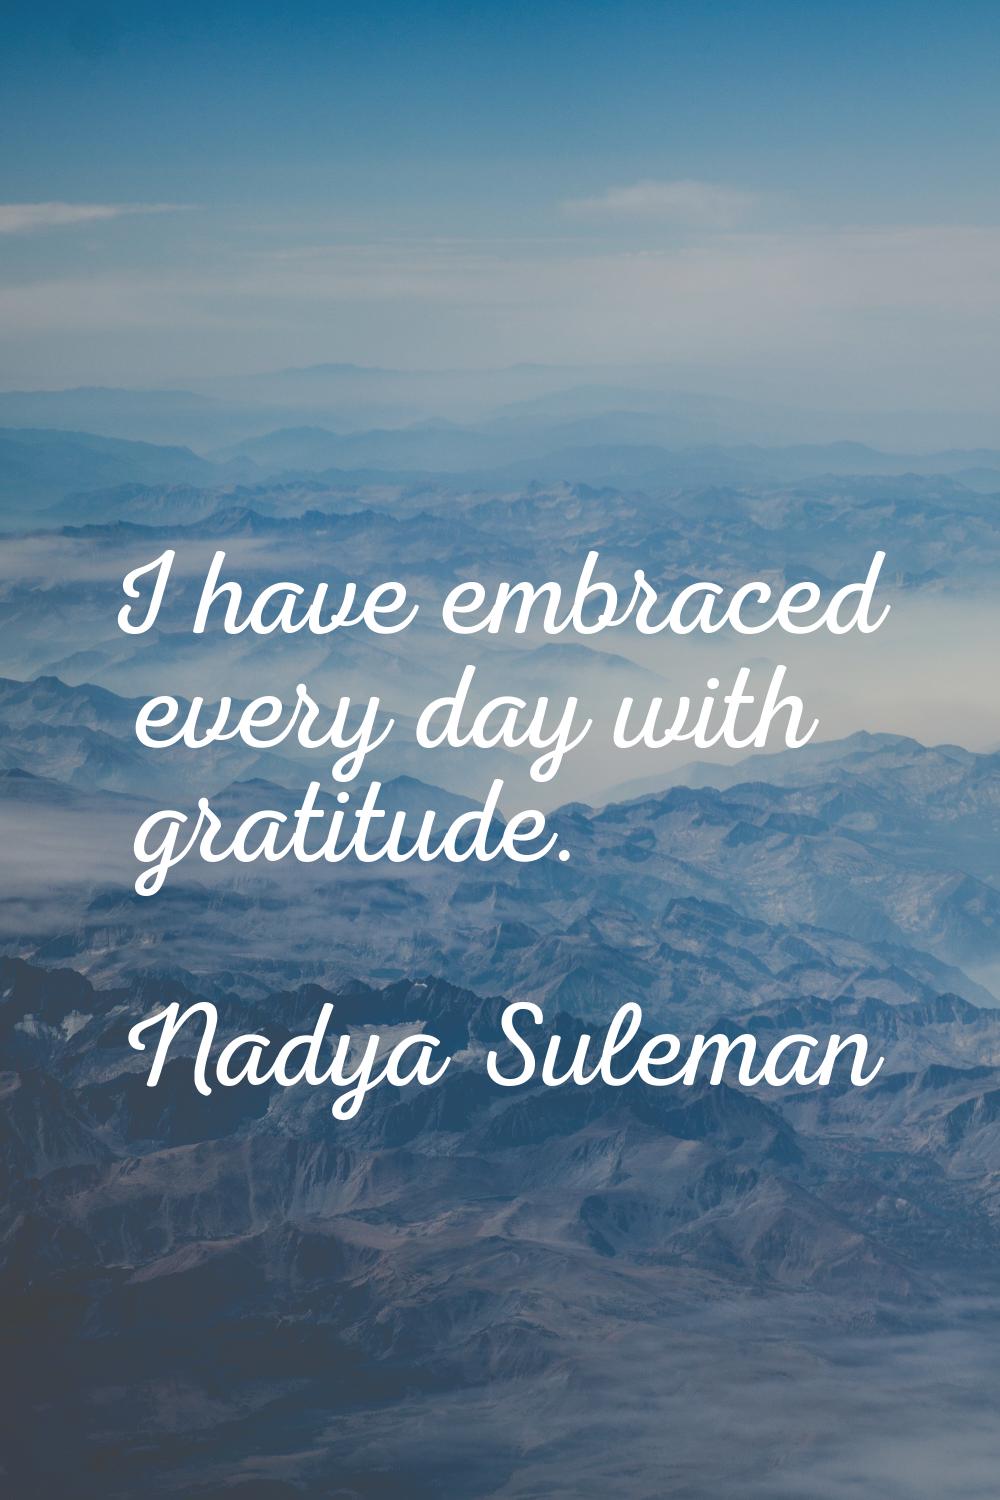 I have embraced every day with gratitude.